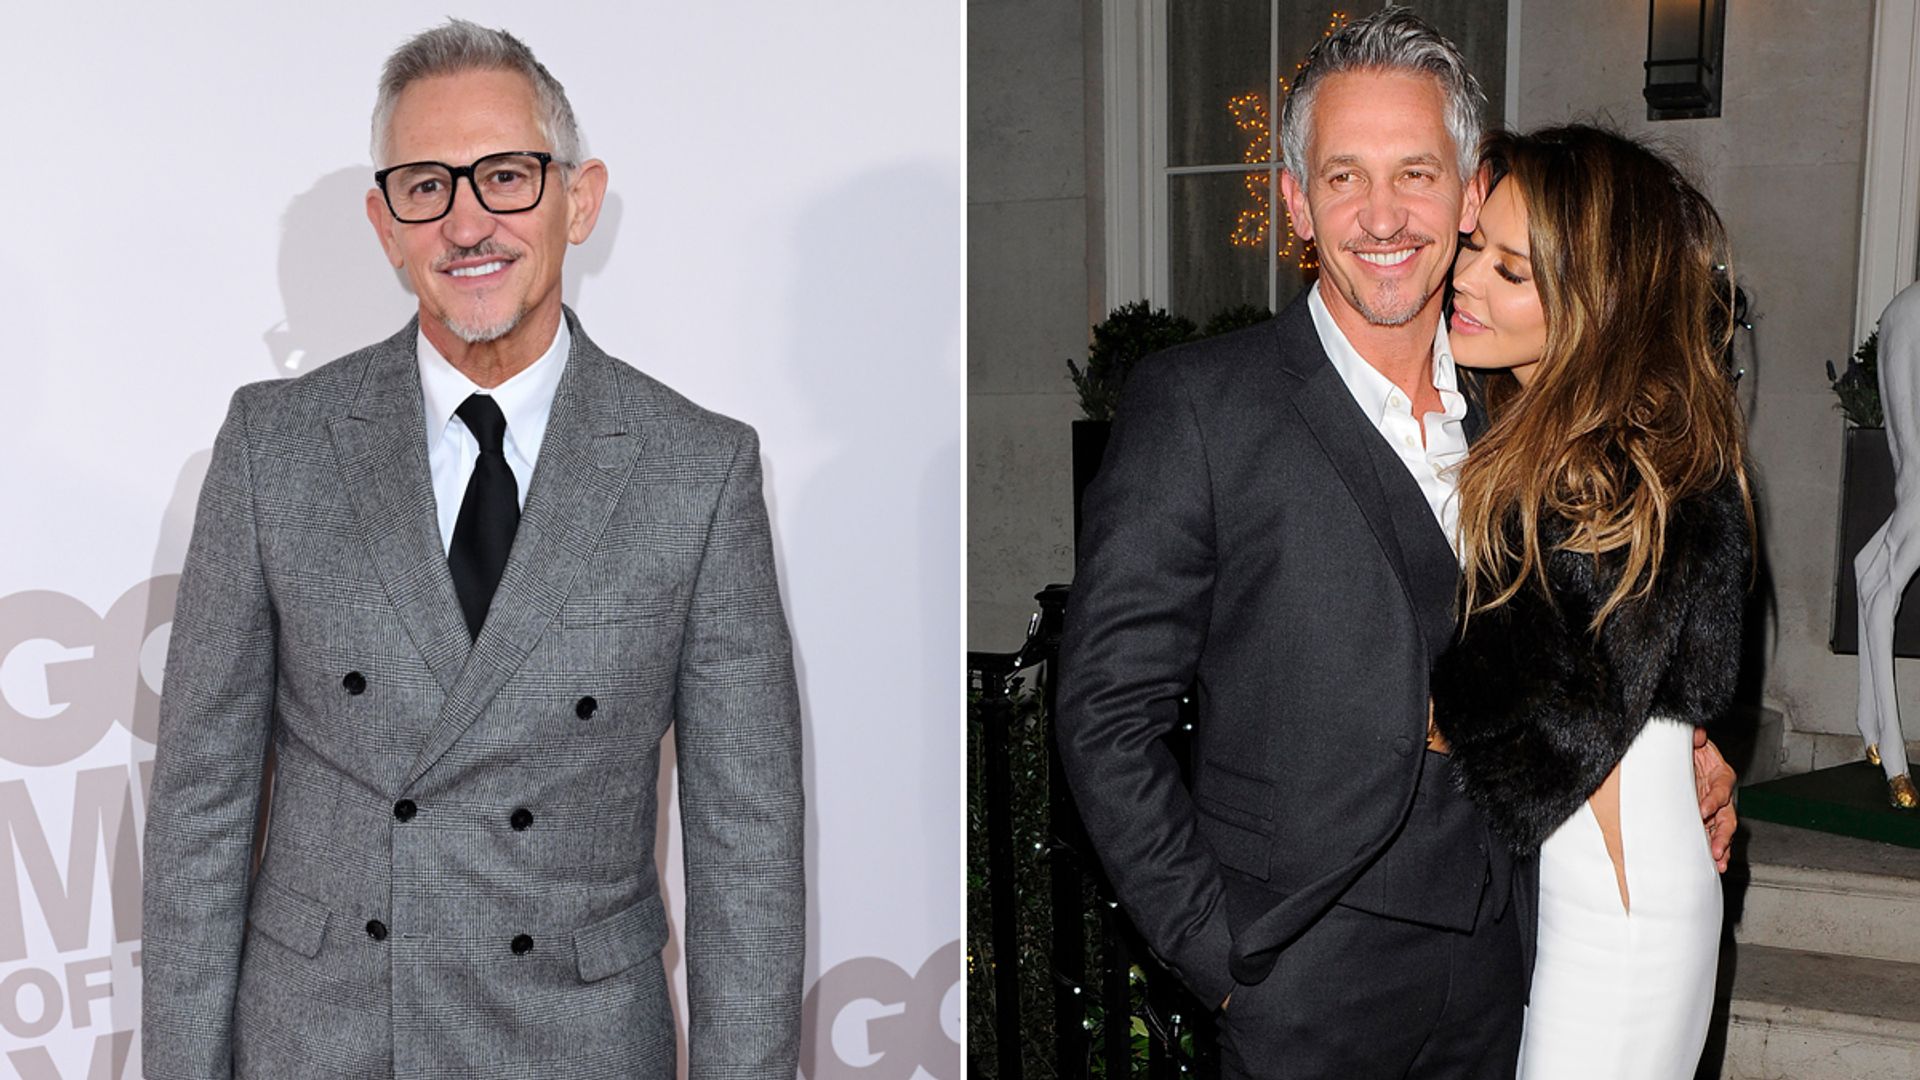 A split image of Gary Lineker and his ex-wife Dannielle